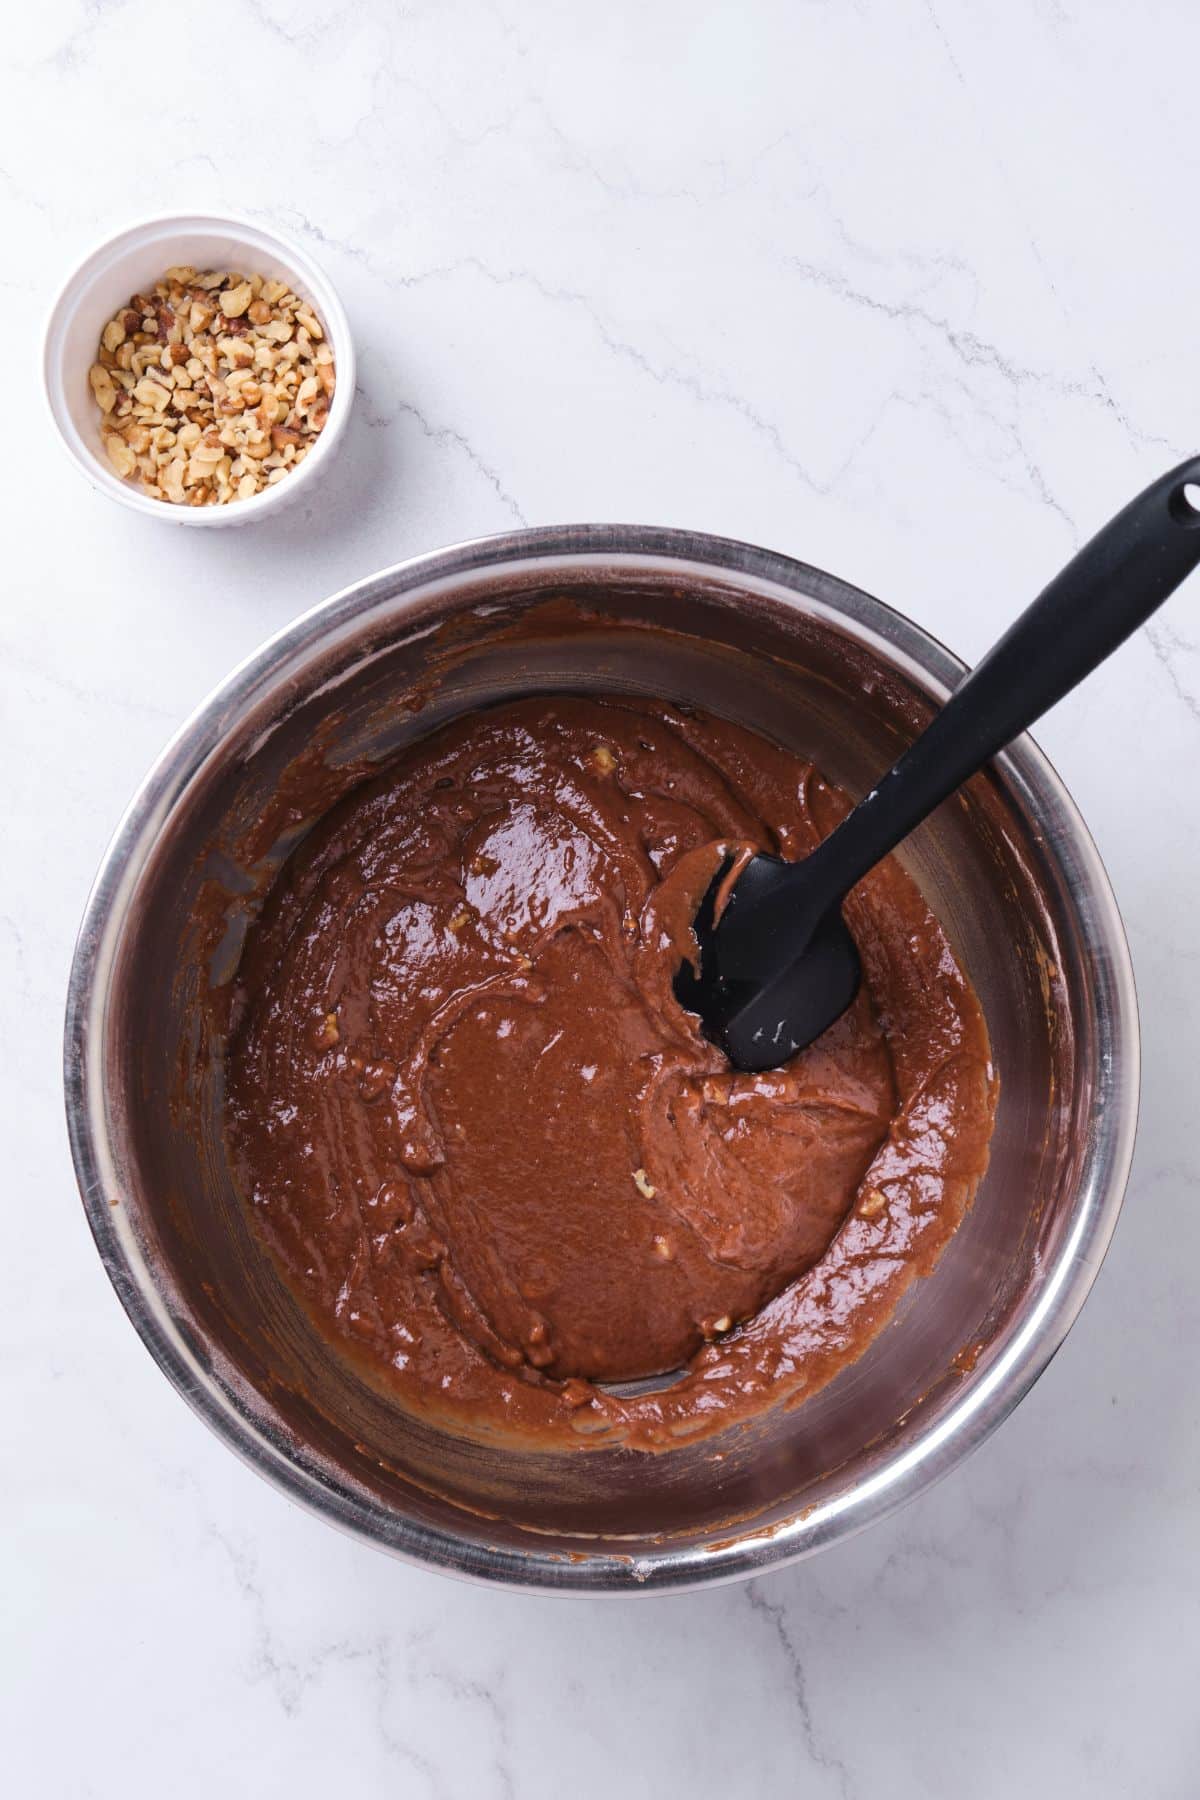 Chocolate cake batter in a bowl with chopped walnuts mixed in.